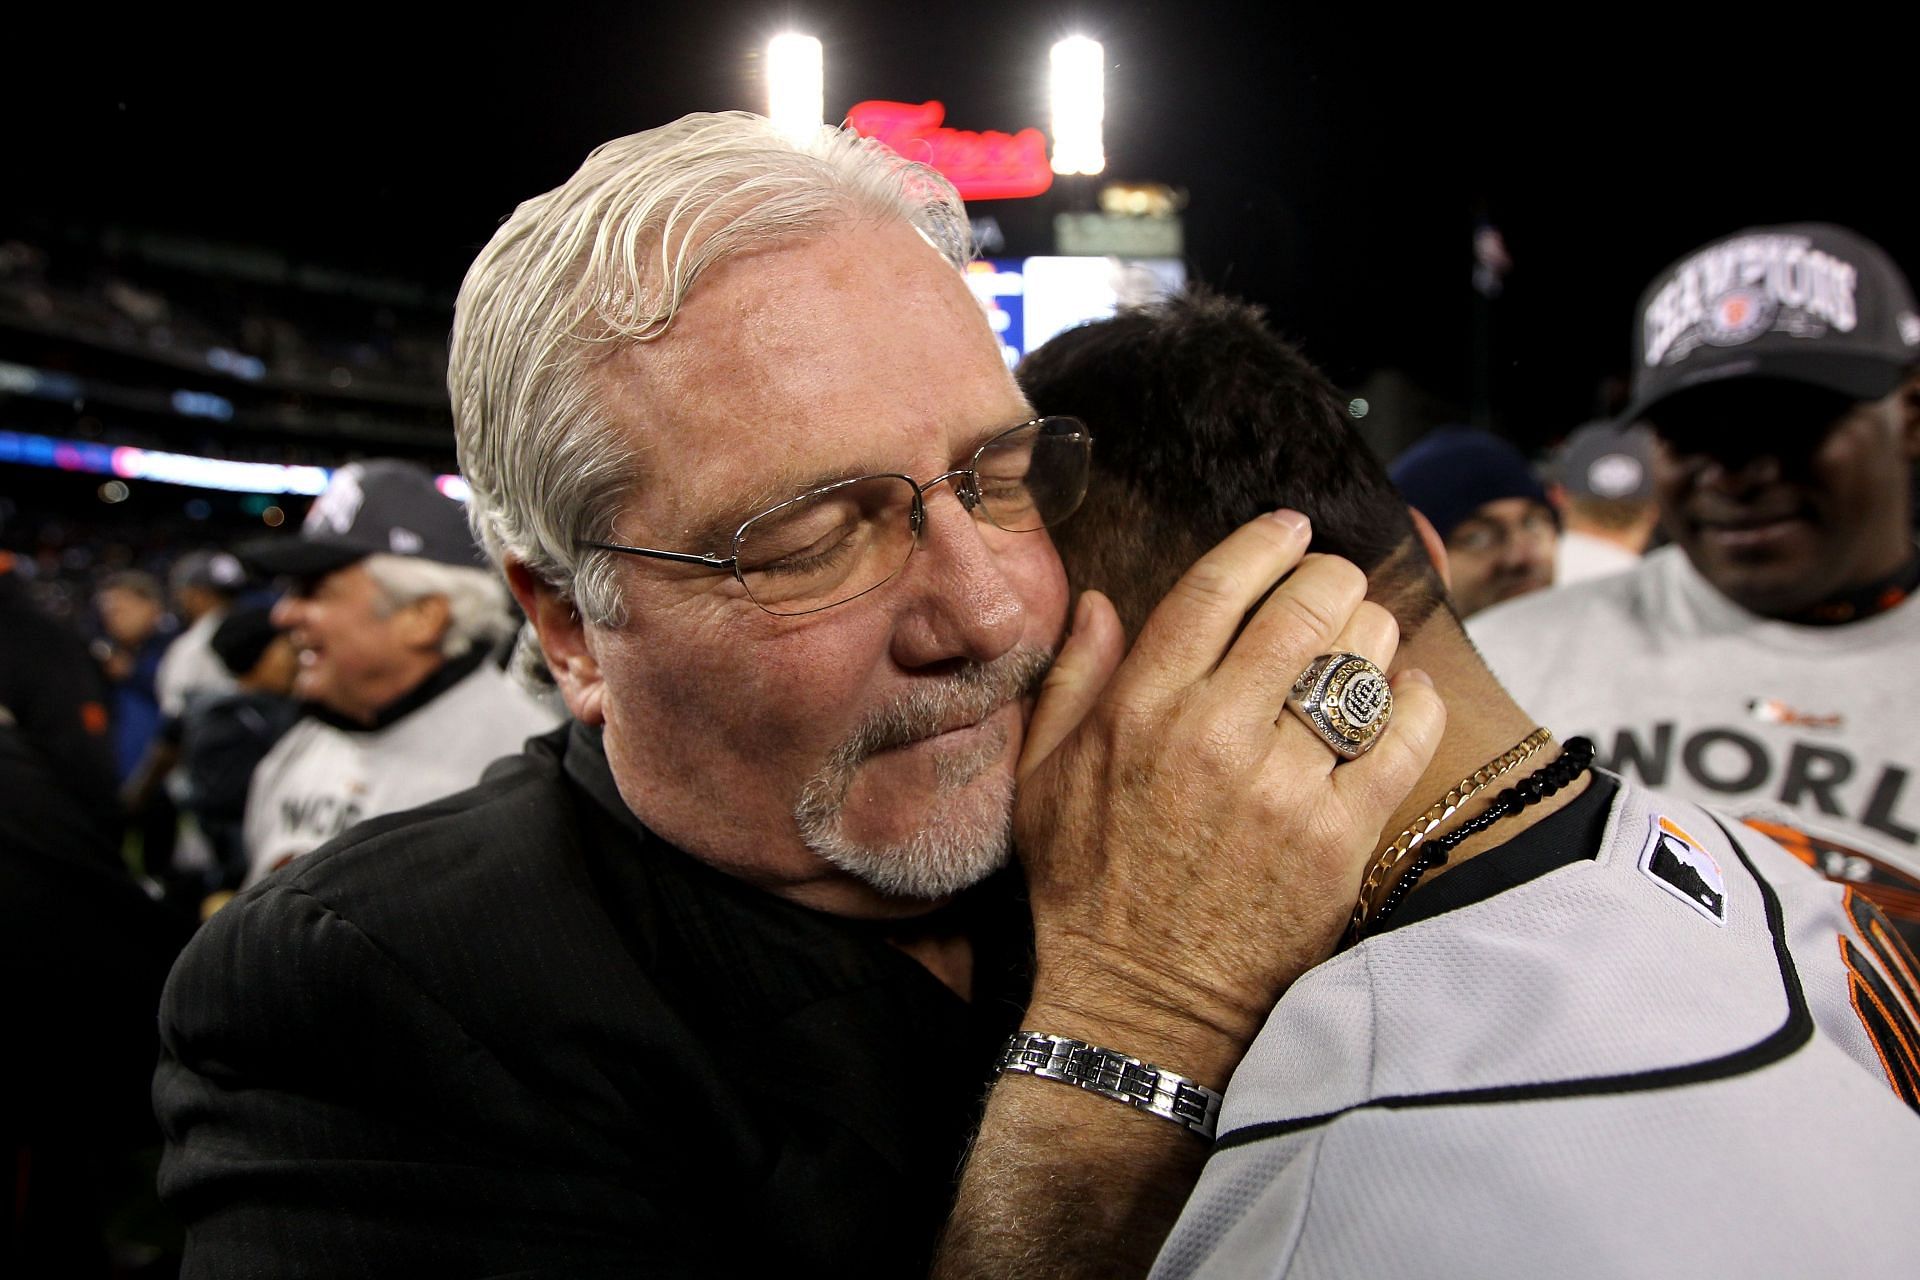 Senior Vice President and General Manager Brian Sabean of the San Francisco Giants celebrates with Sergio Romo #54 after the Giants defeat the Detroit Tigers to win the World Series